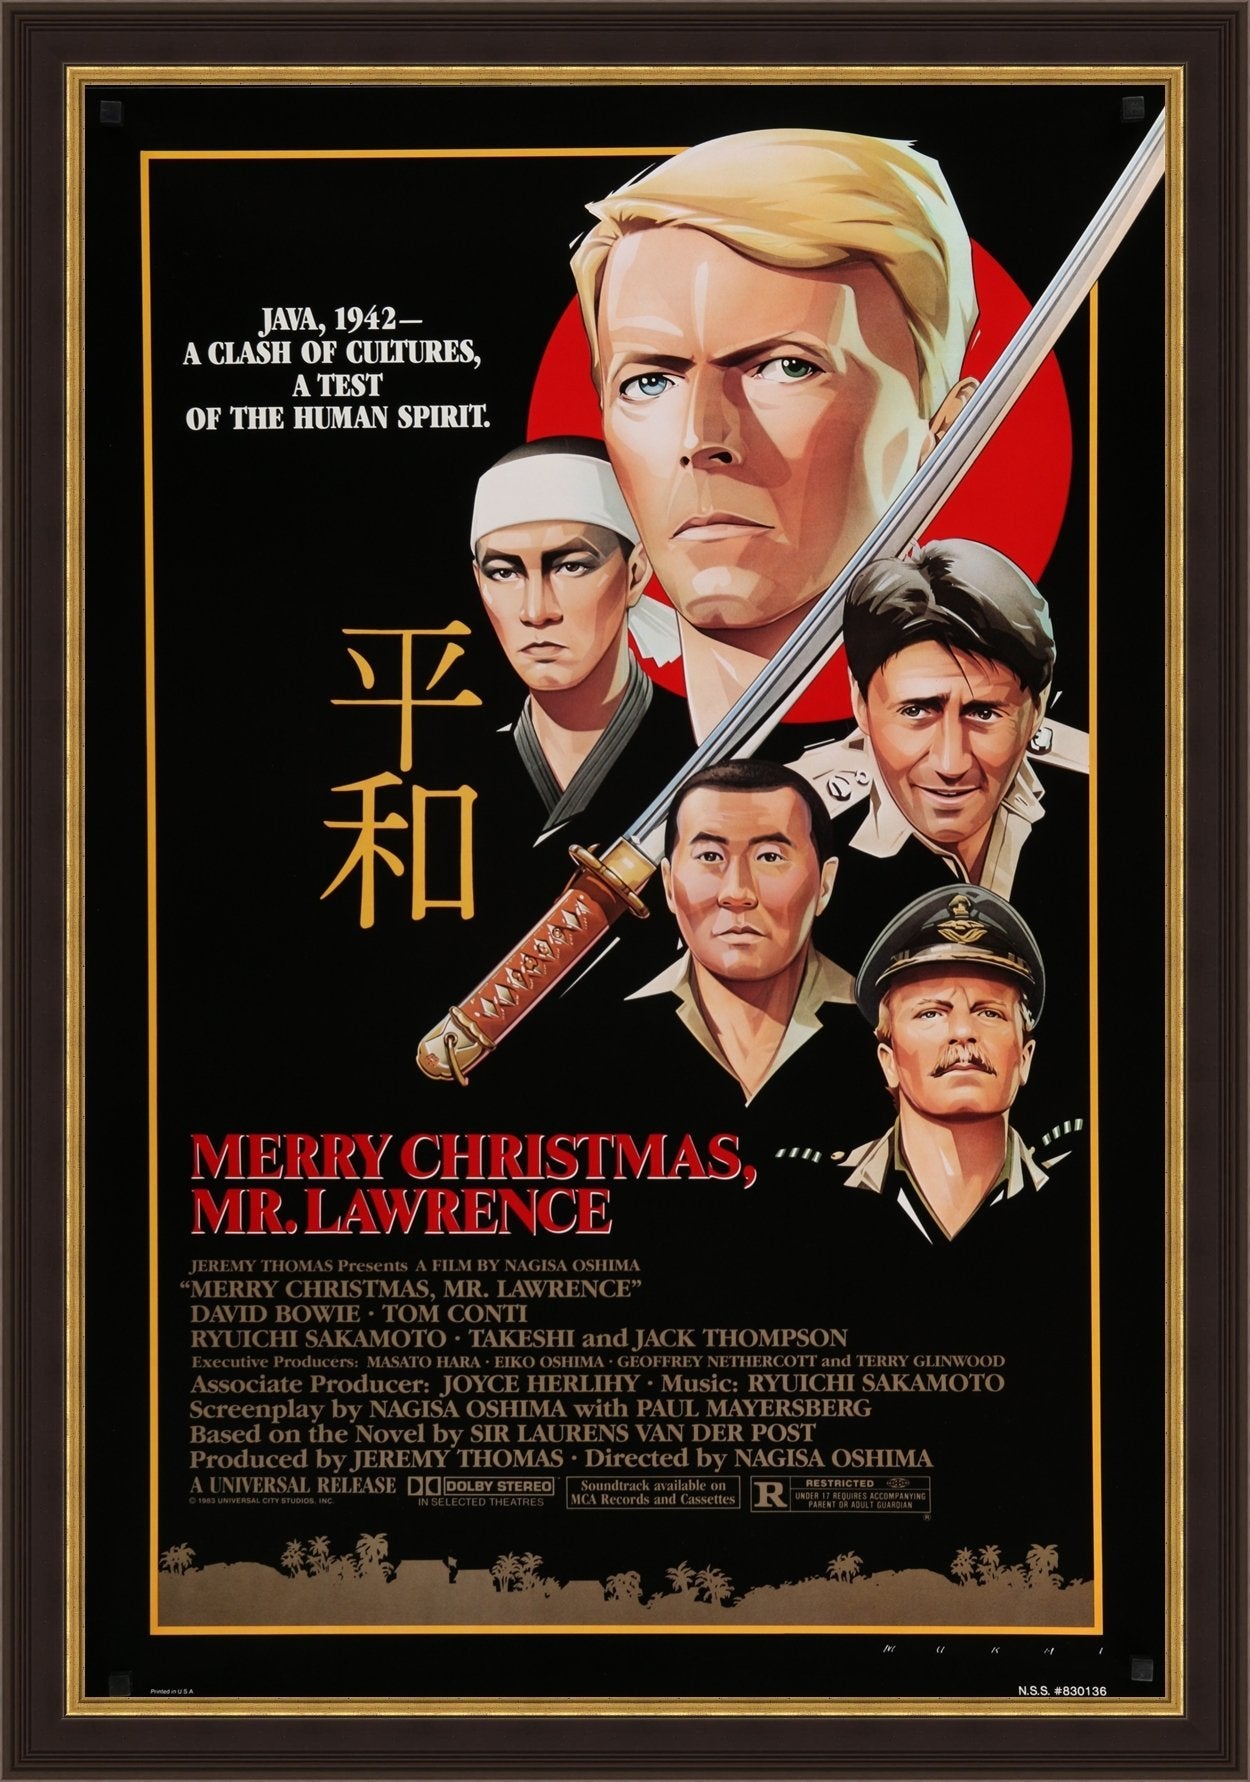 An original movie poster for Merry Christmas Mr Lawrence starring David Bowie